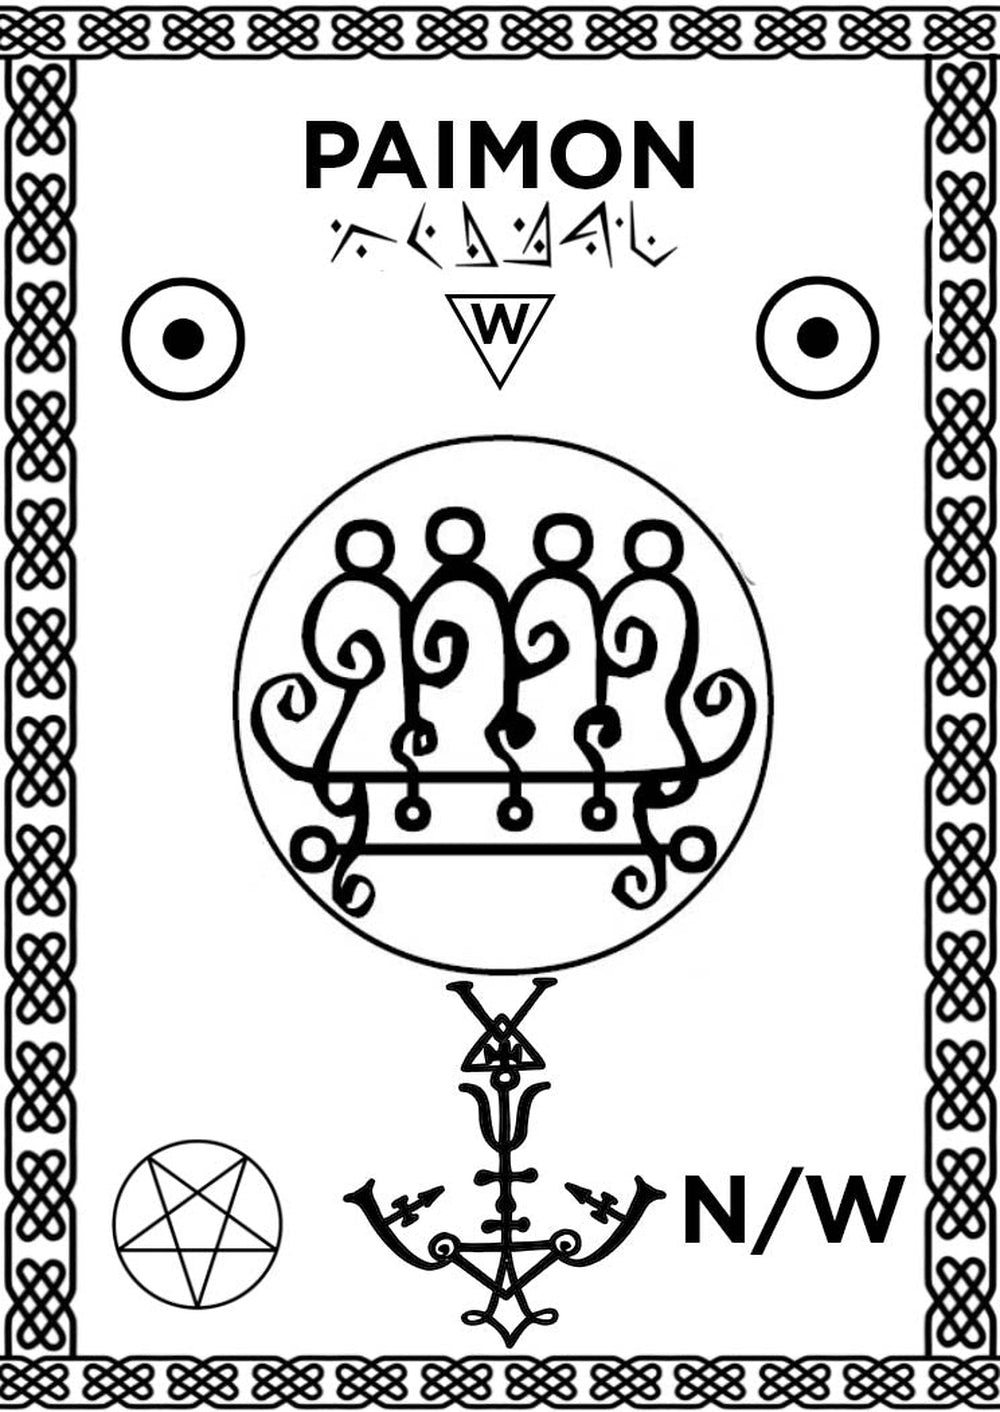 Invocation-Alignment Pad-with-the-Sigil-of-Paimon-for-home-oltar-Witchcraft-2